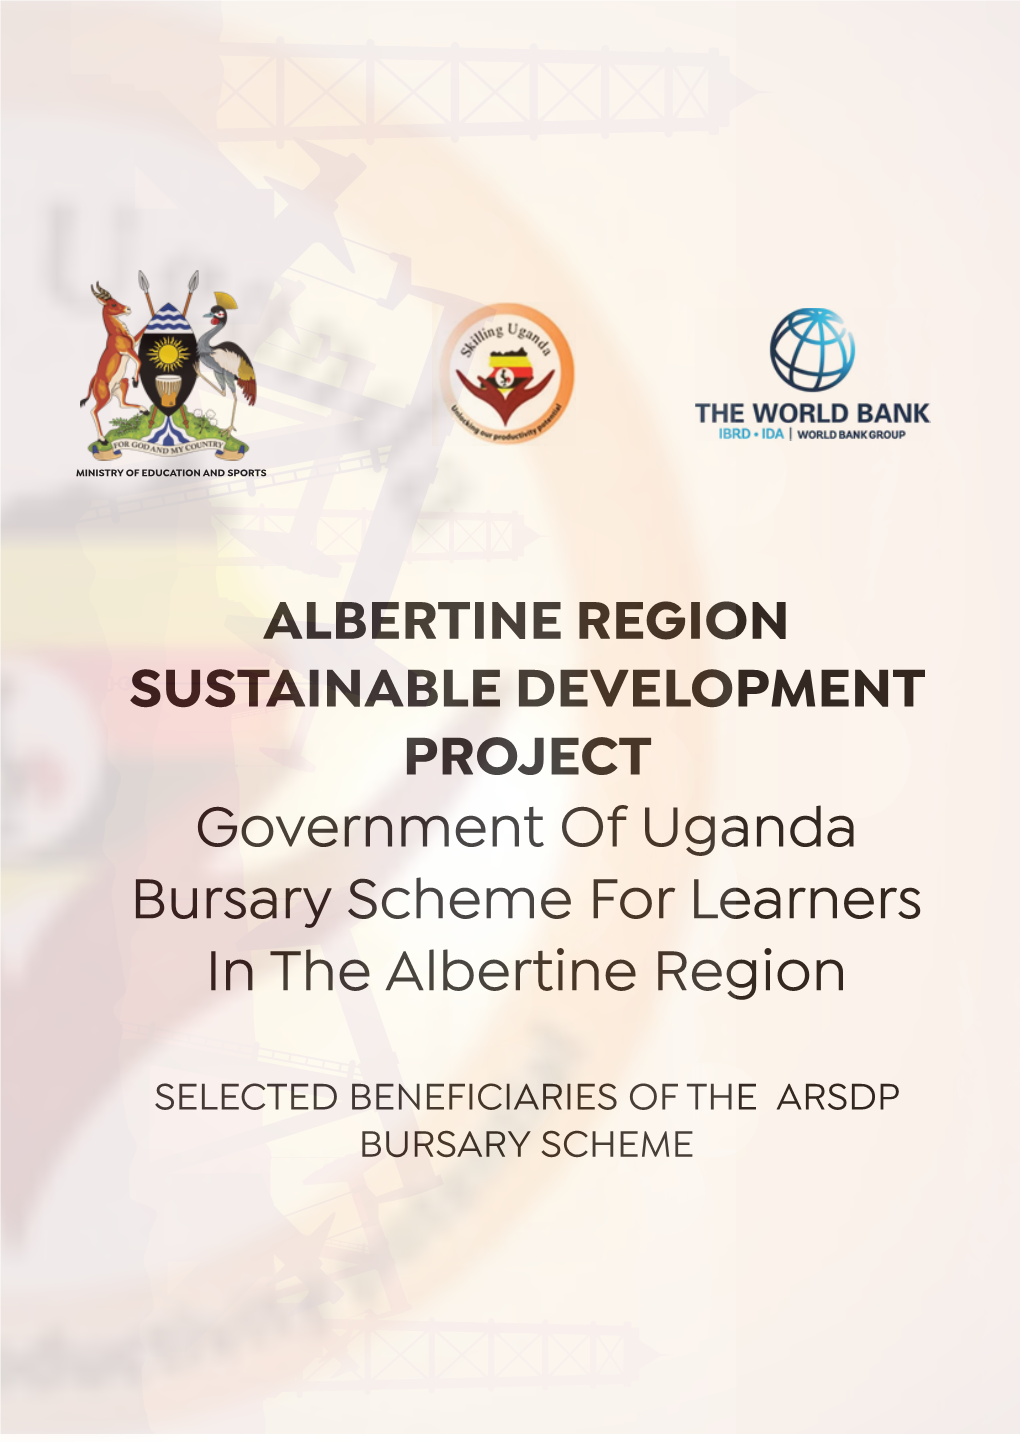 Government of Uganda Bursary Scheme for Learners in The